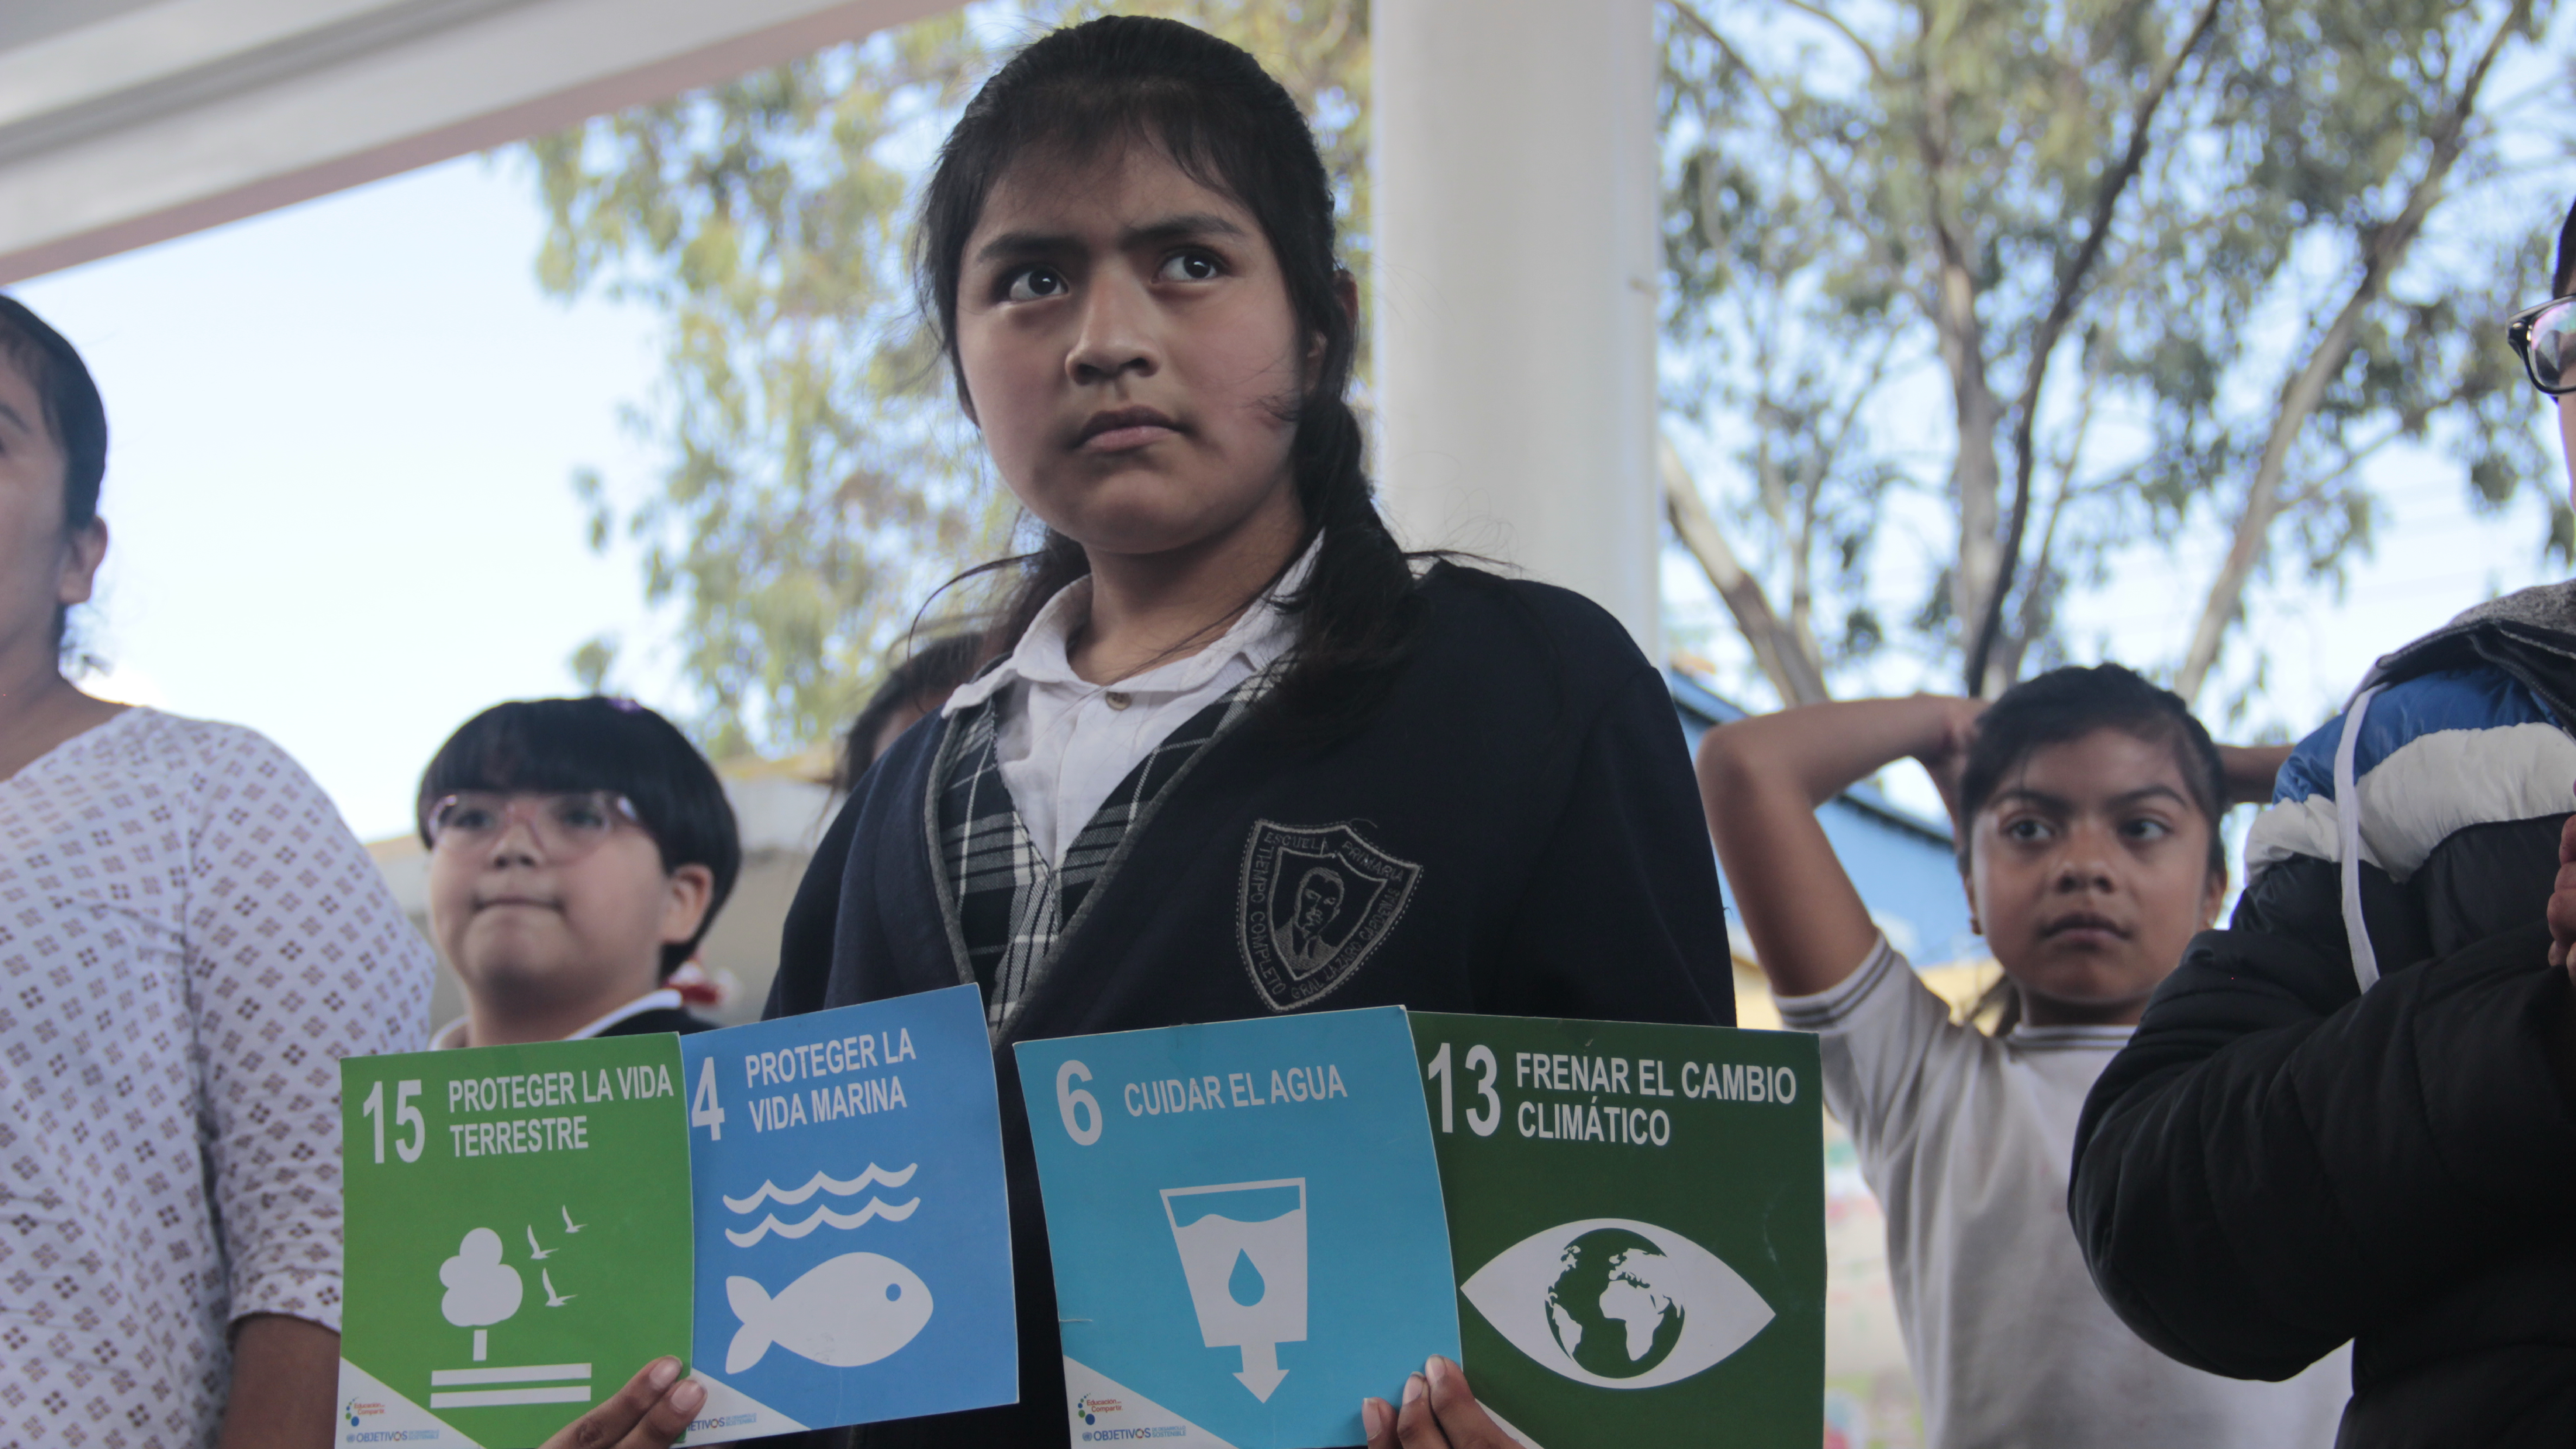 How to teach sustainable development